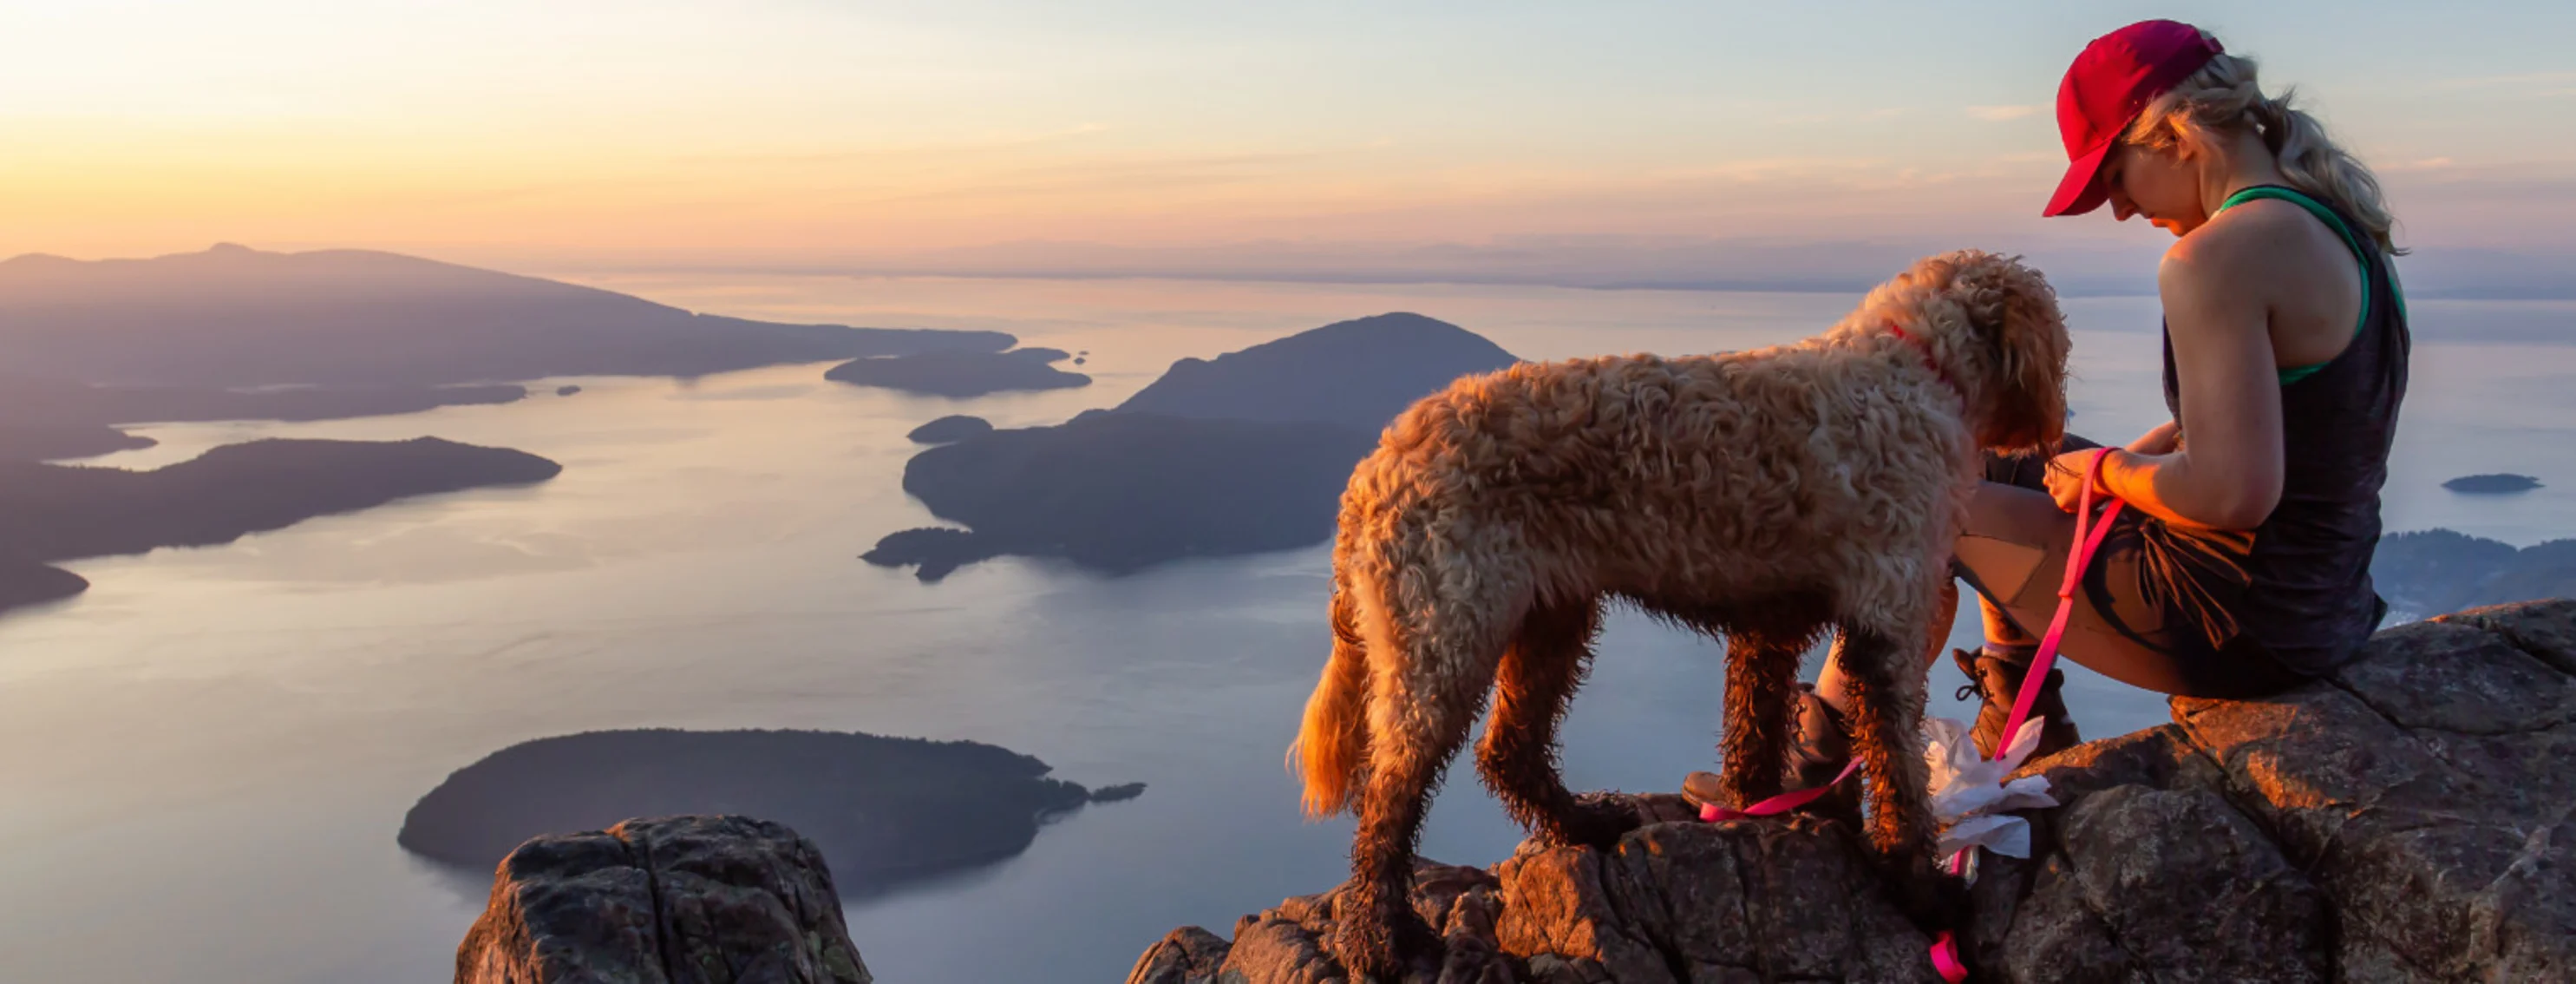 A woman and a fluffy dog sitting on a cliff overlooking water at sunset